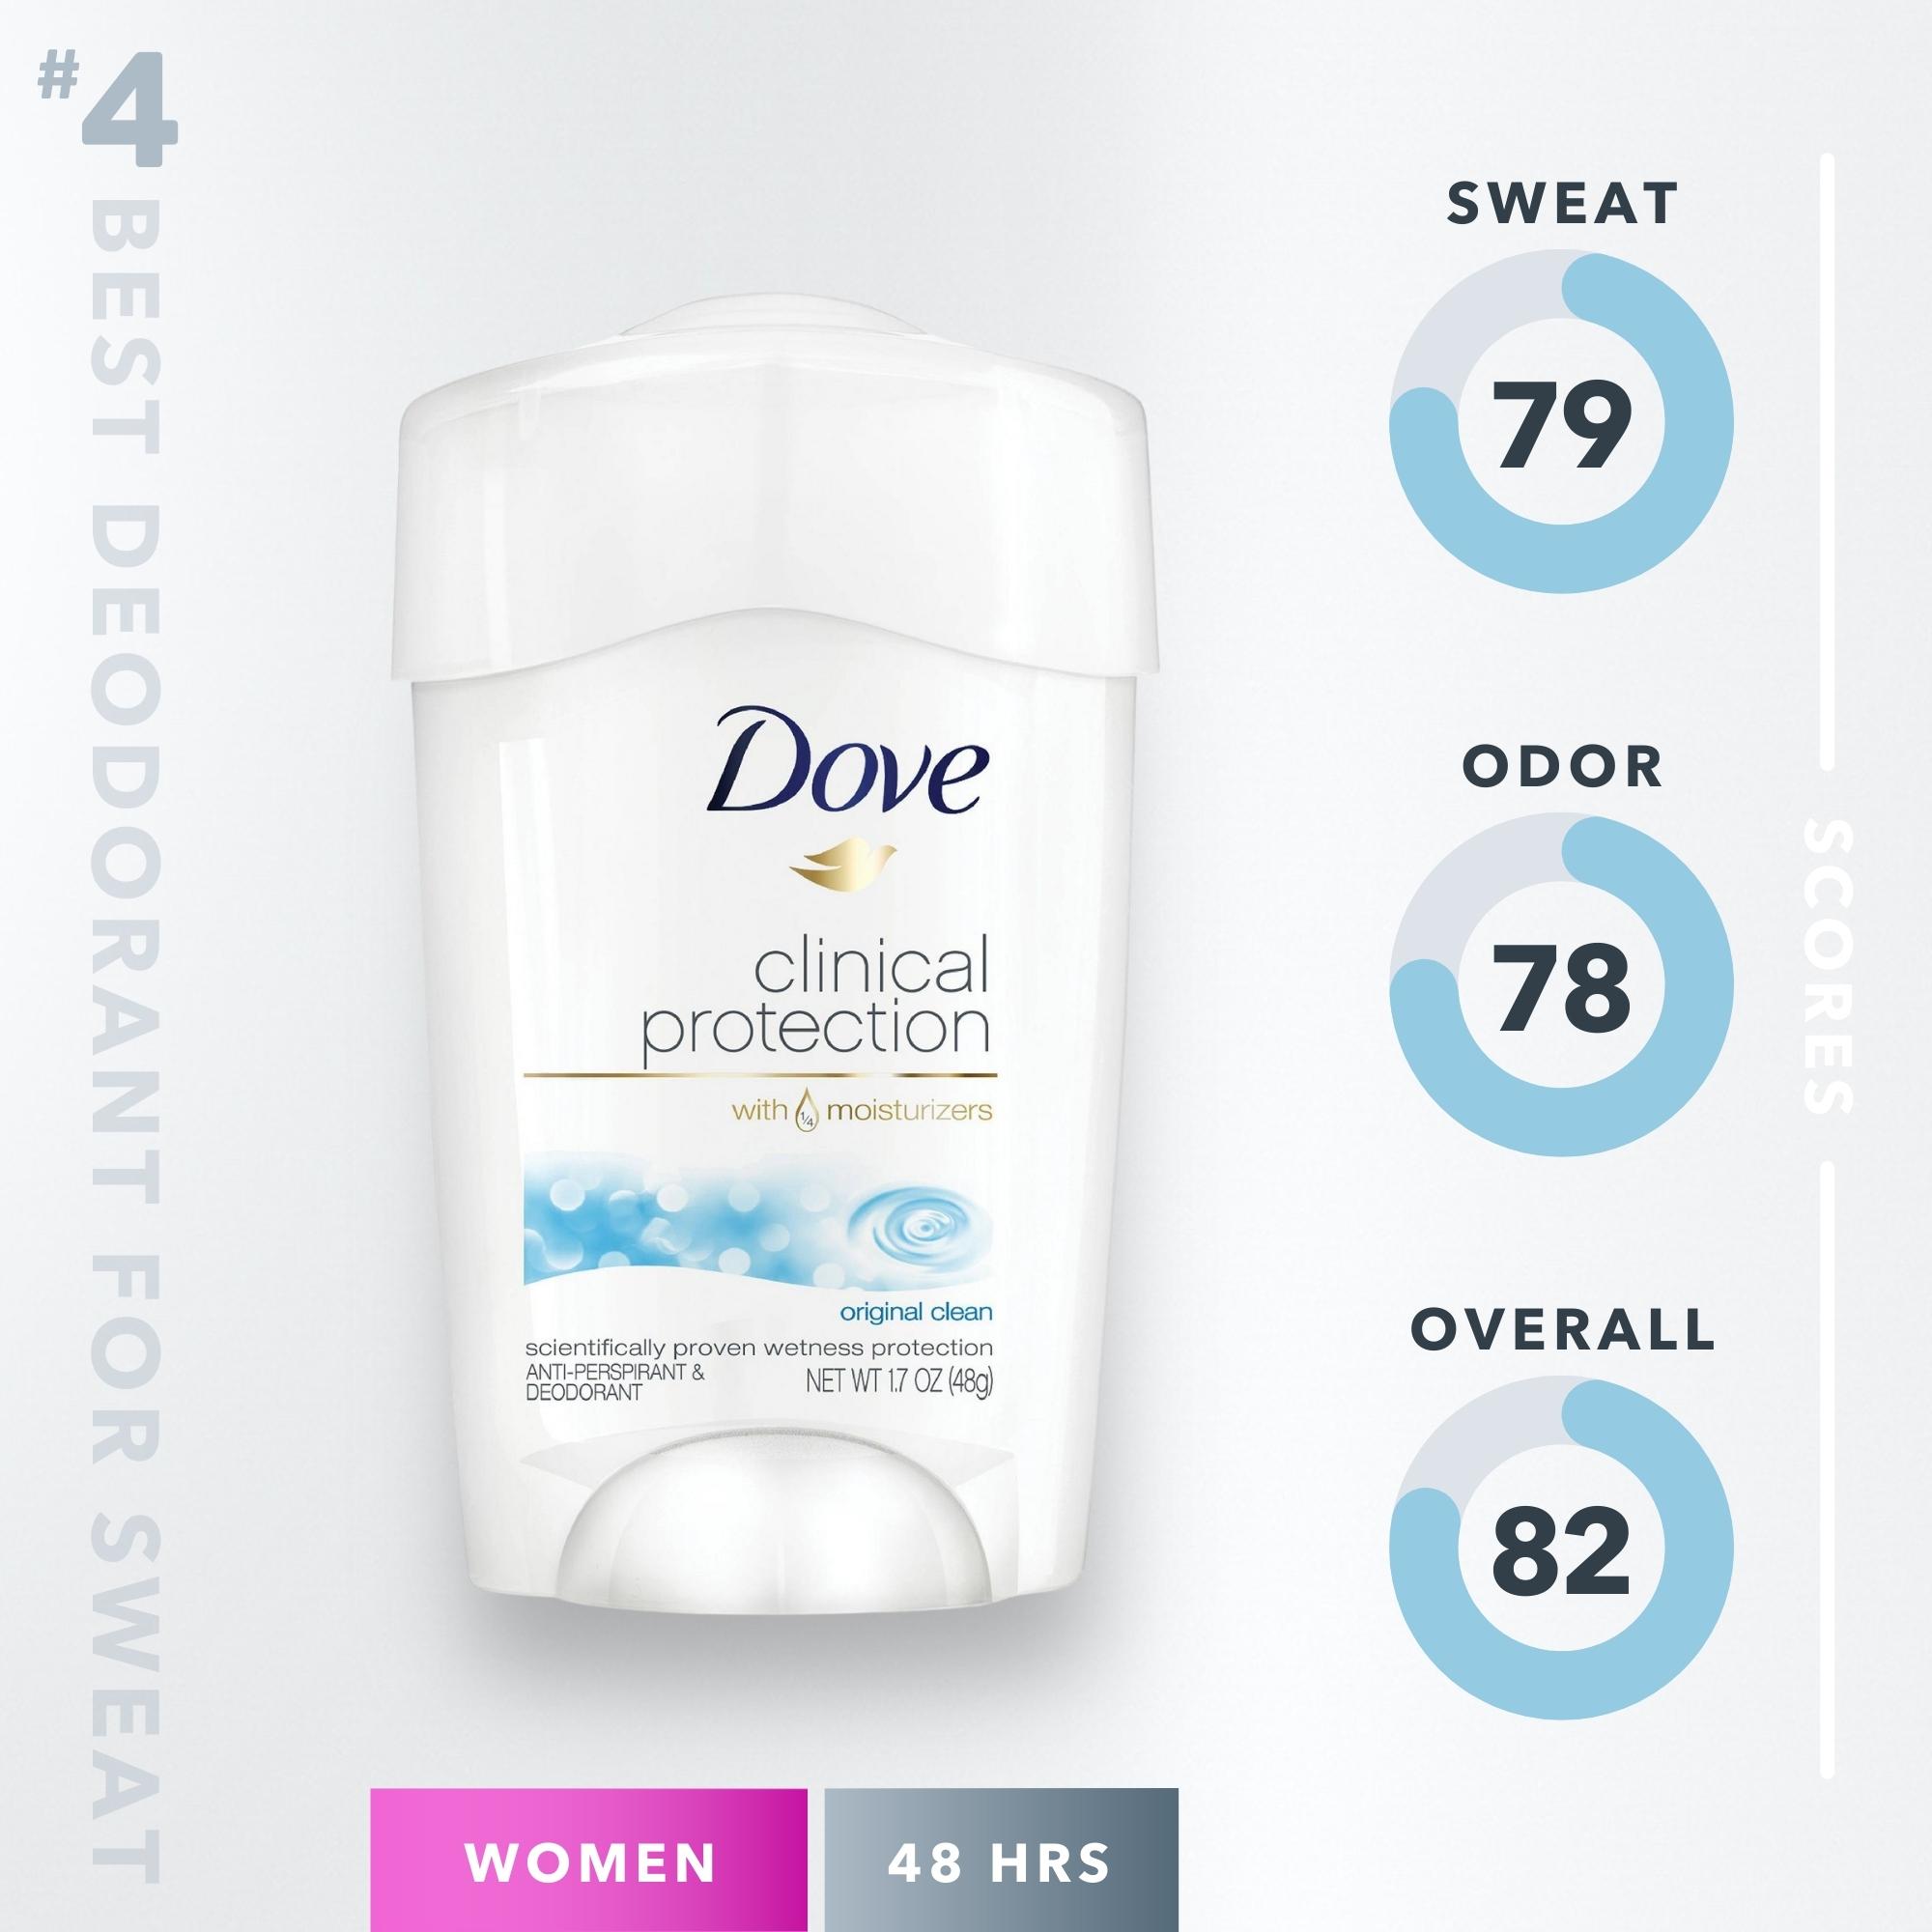 Carpe Underarm Antiperspirant and Deodorant, Pack of 3-WITH 3 FREE  ON-THE-GO WIPES!